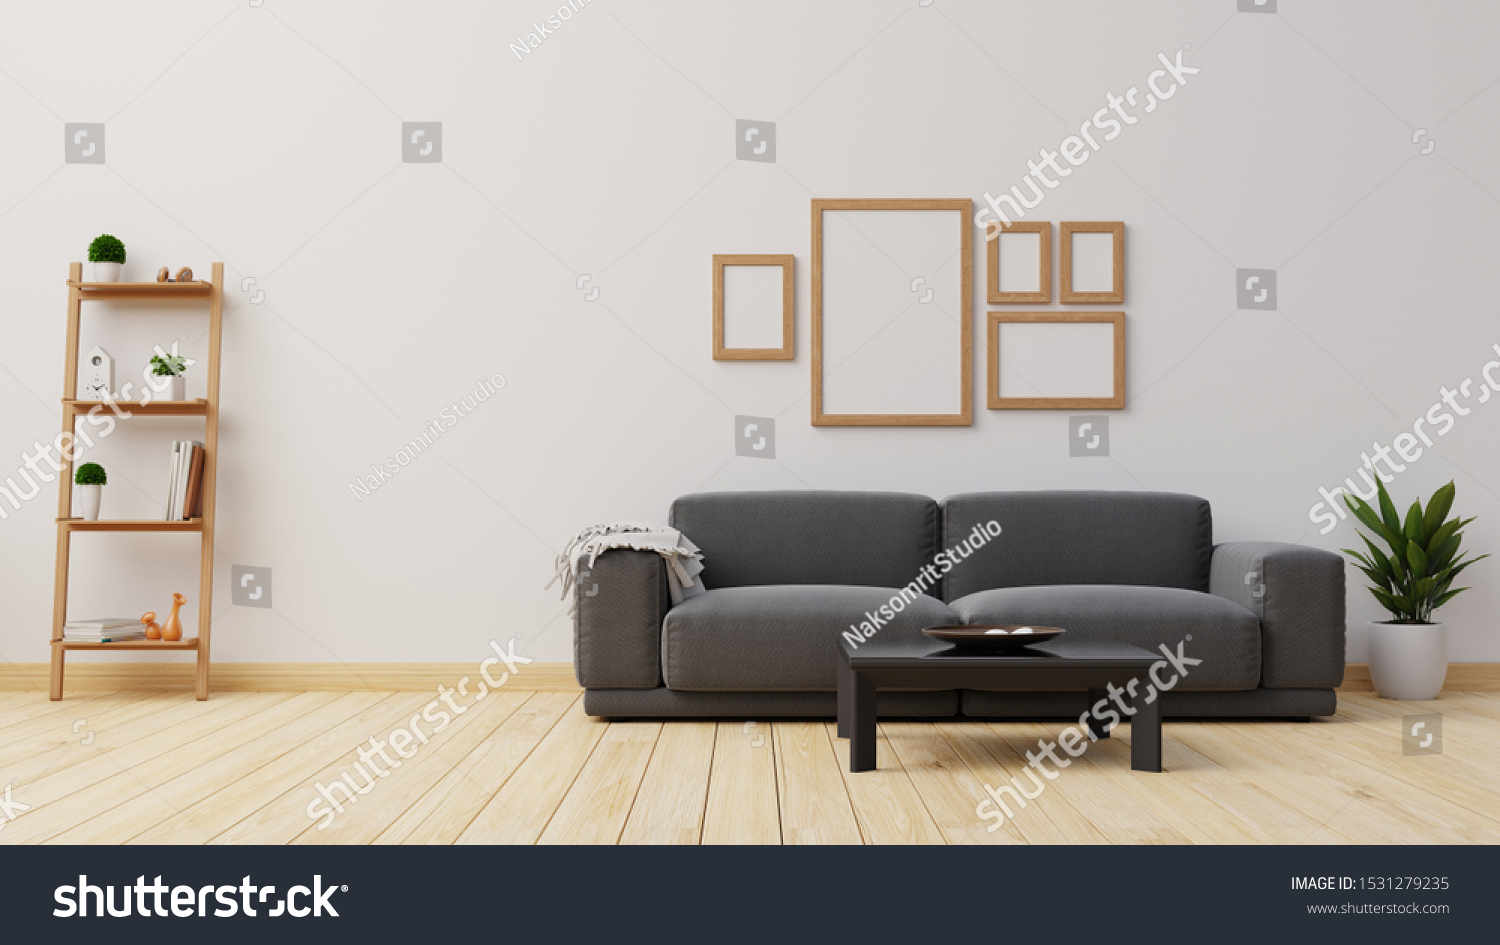 Interior poster mock up living room with colorful white sofa . 3D rendering.  #1531279235